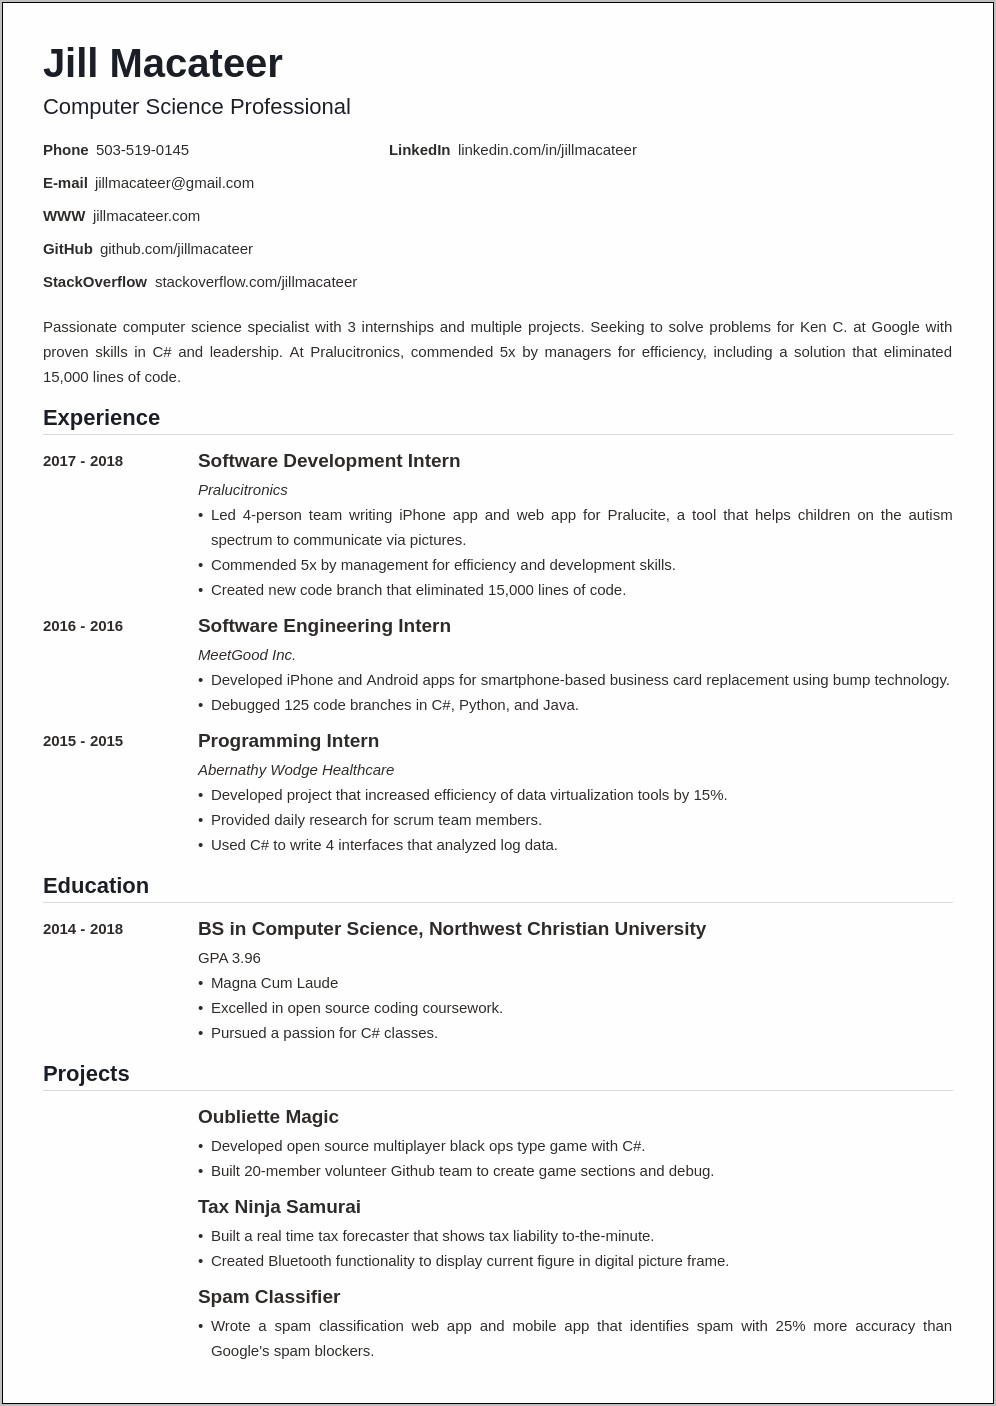 Resume For Professor Job With No Experience